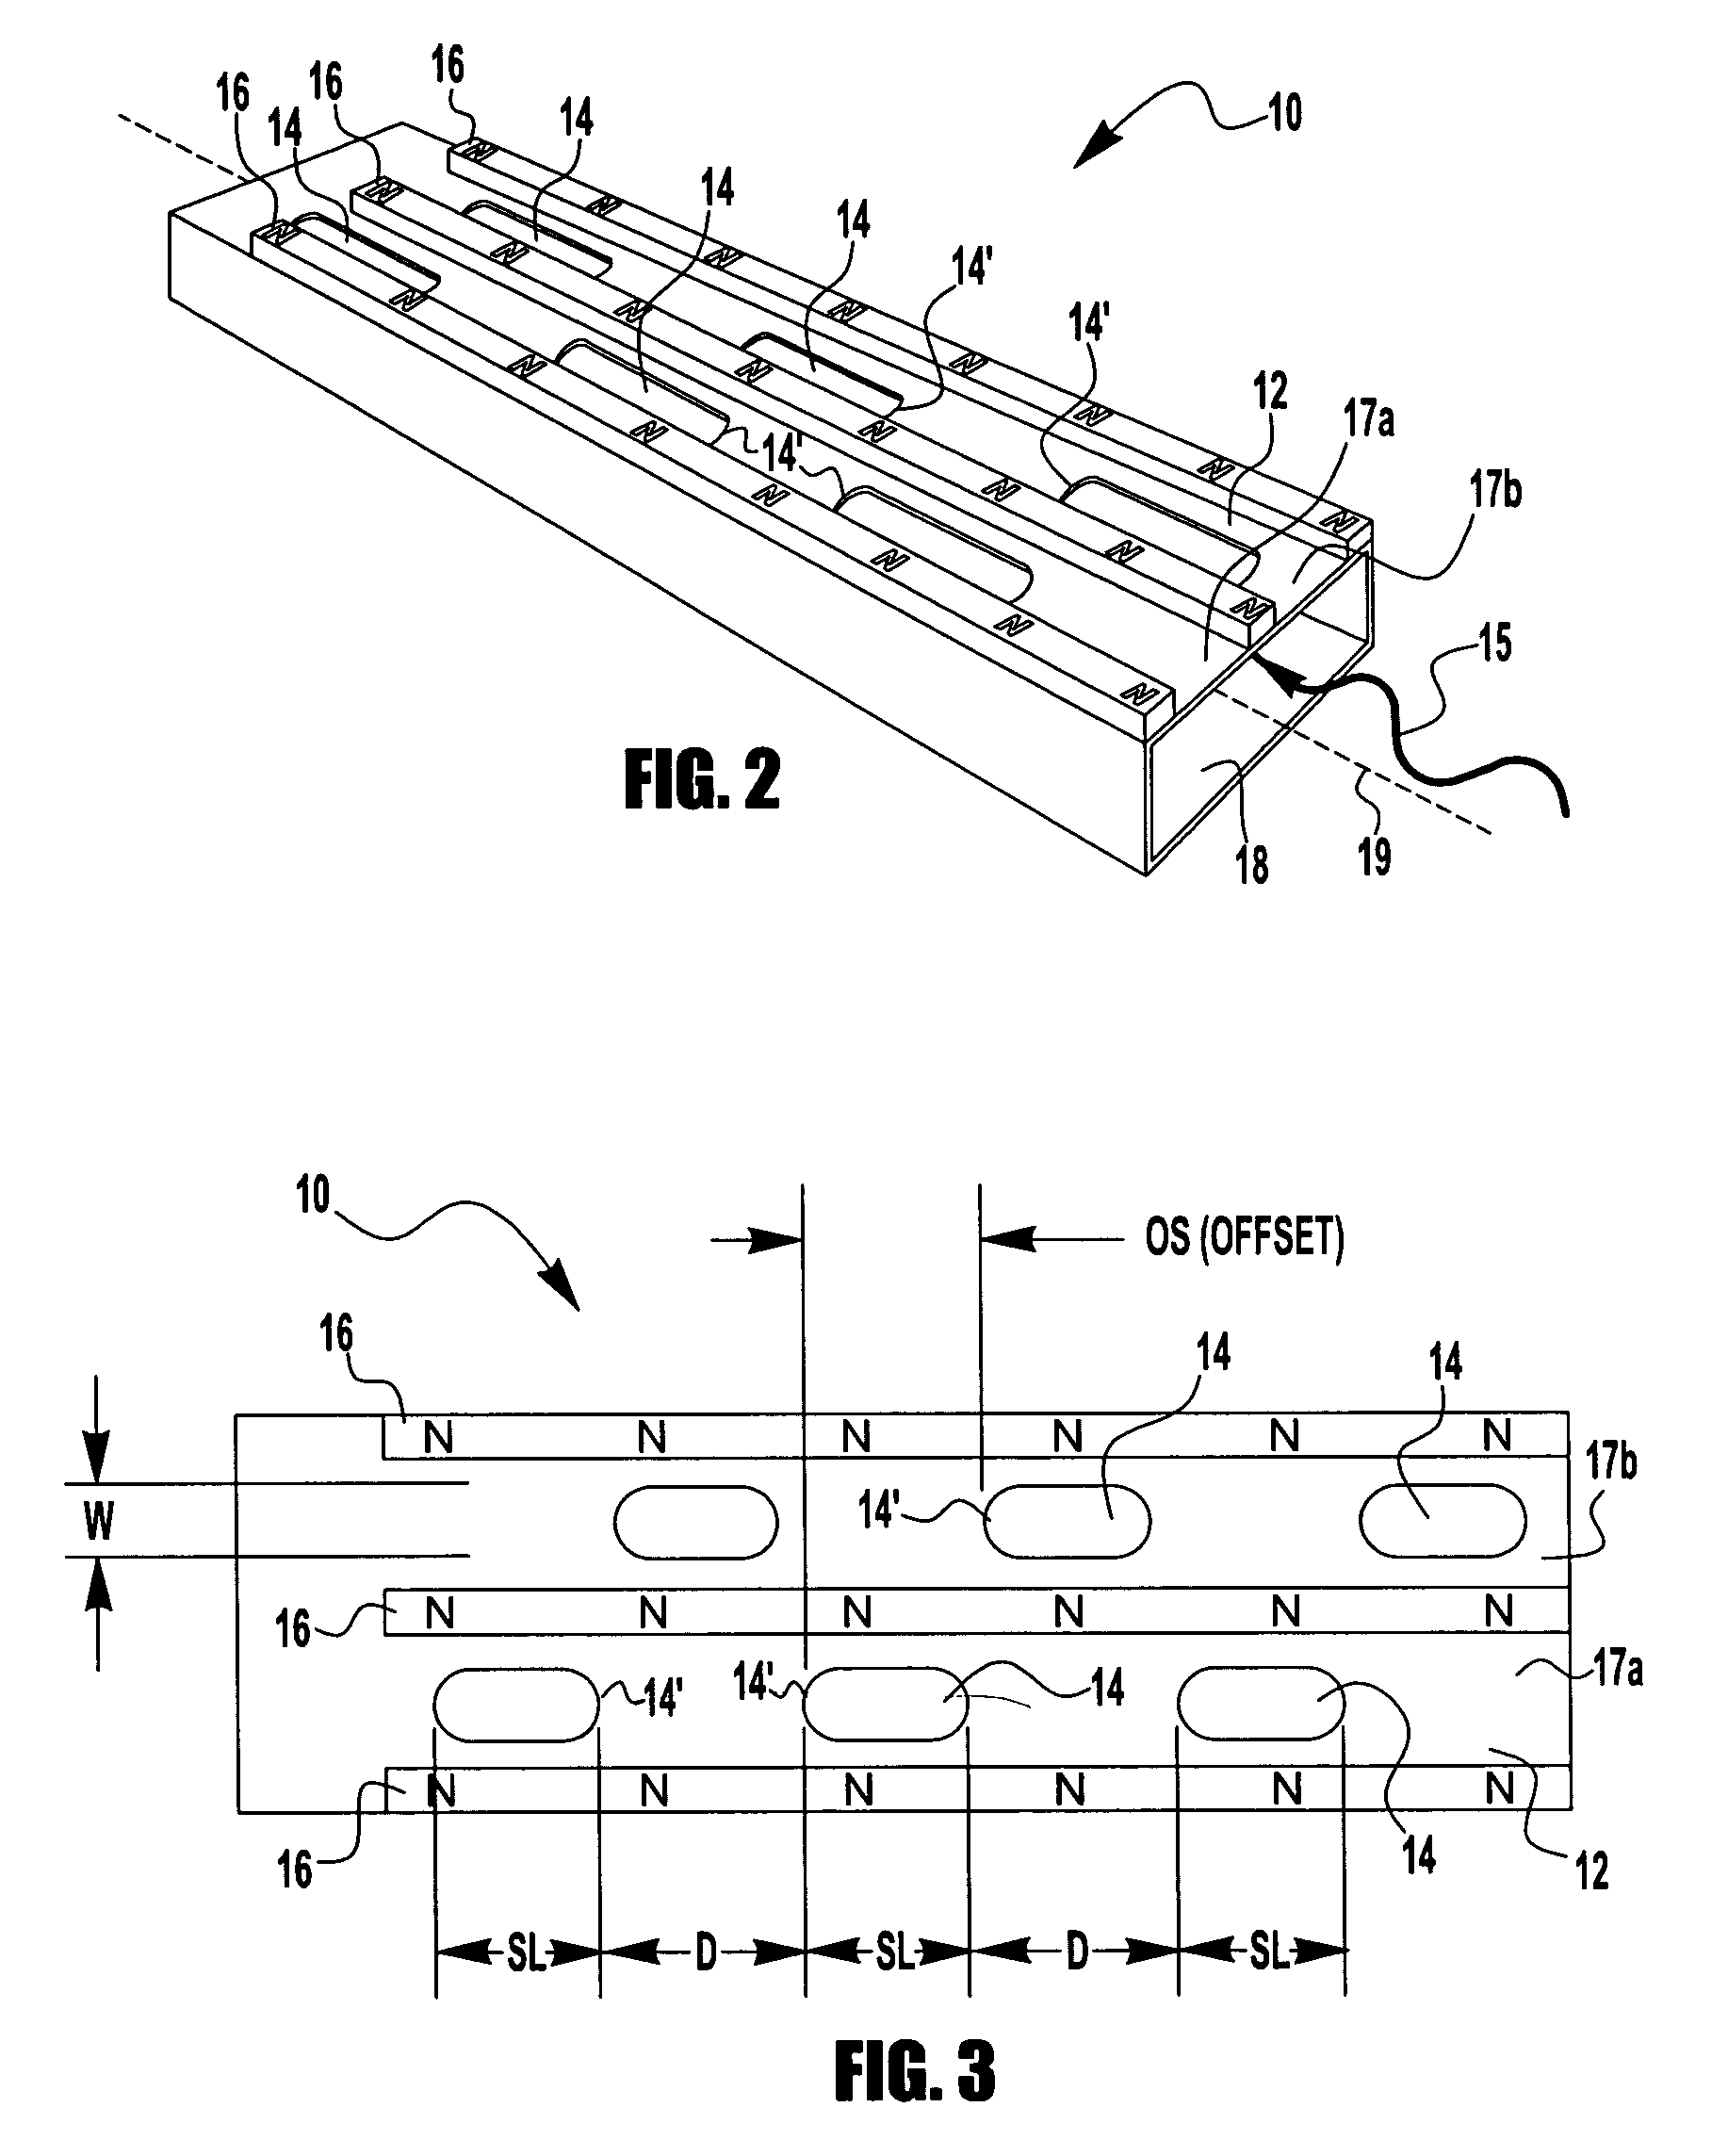 Slotted antenna waveguide plasma source